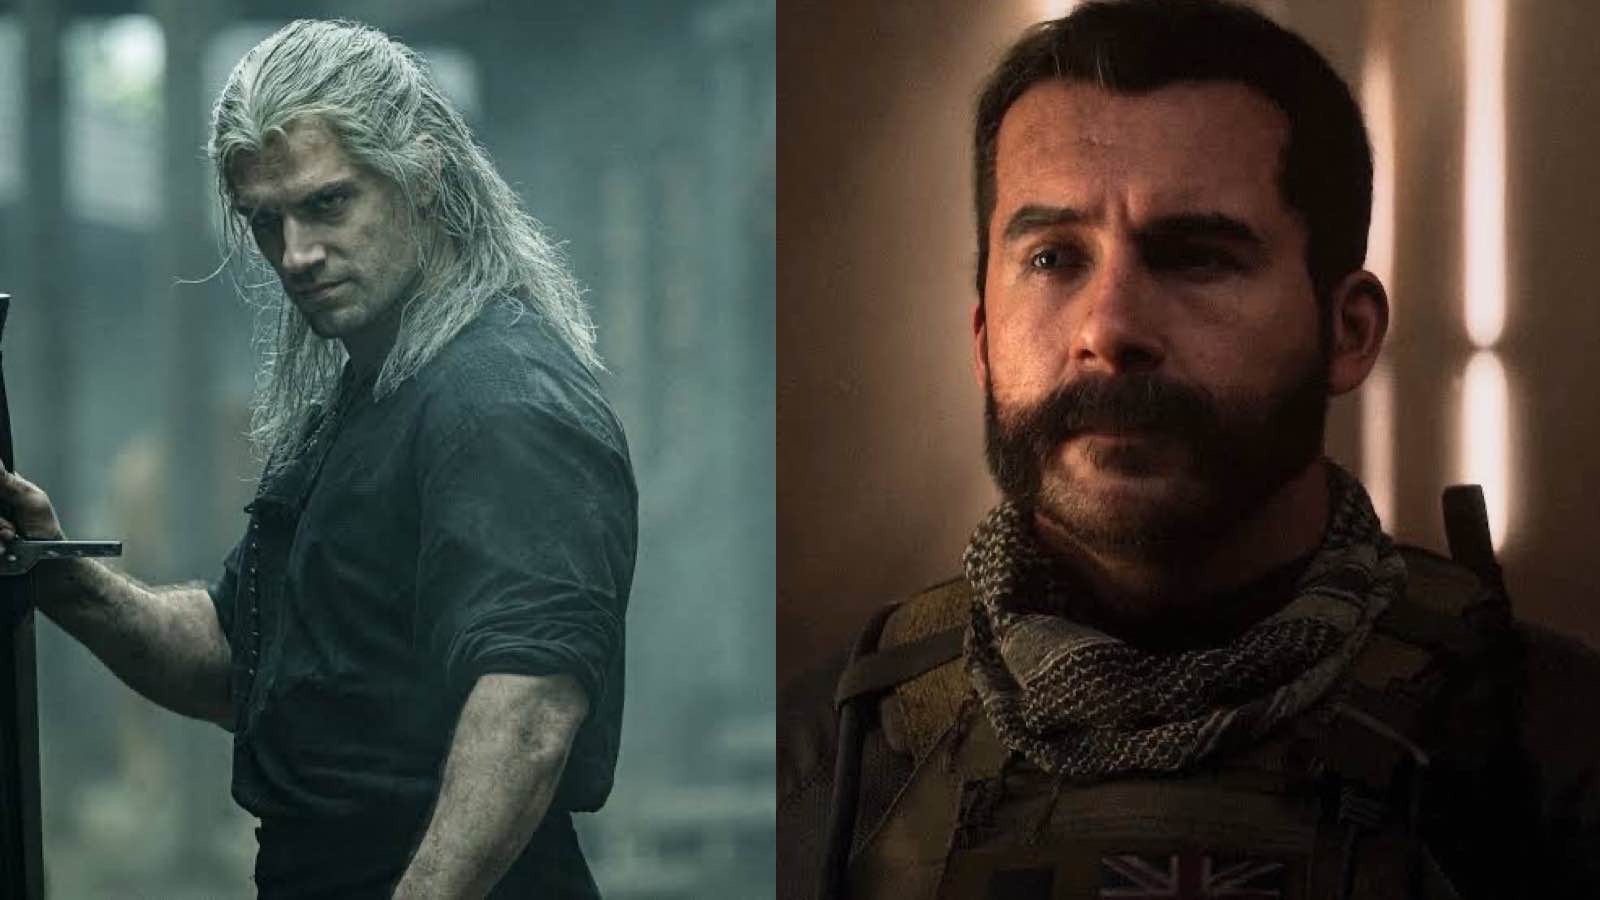 Henry Cavill rumored to play Captain Price in upcoming Call of Duty movie produced by Amazon Studios